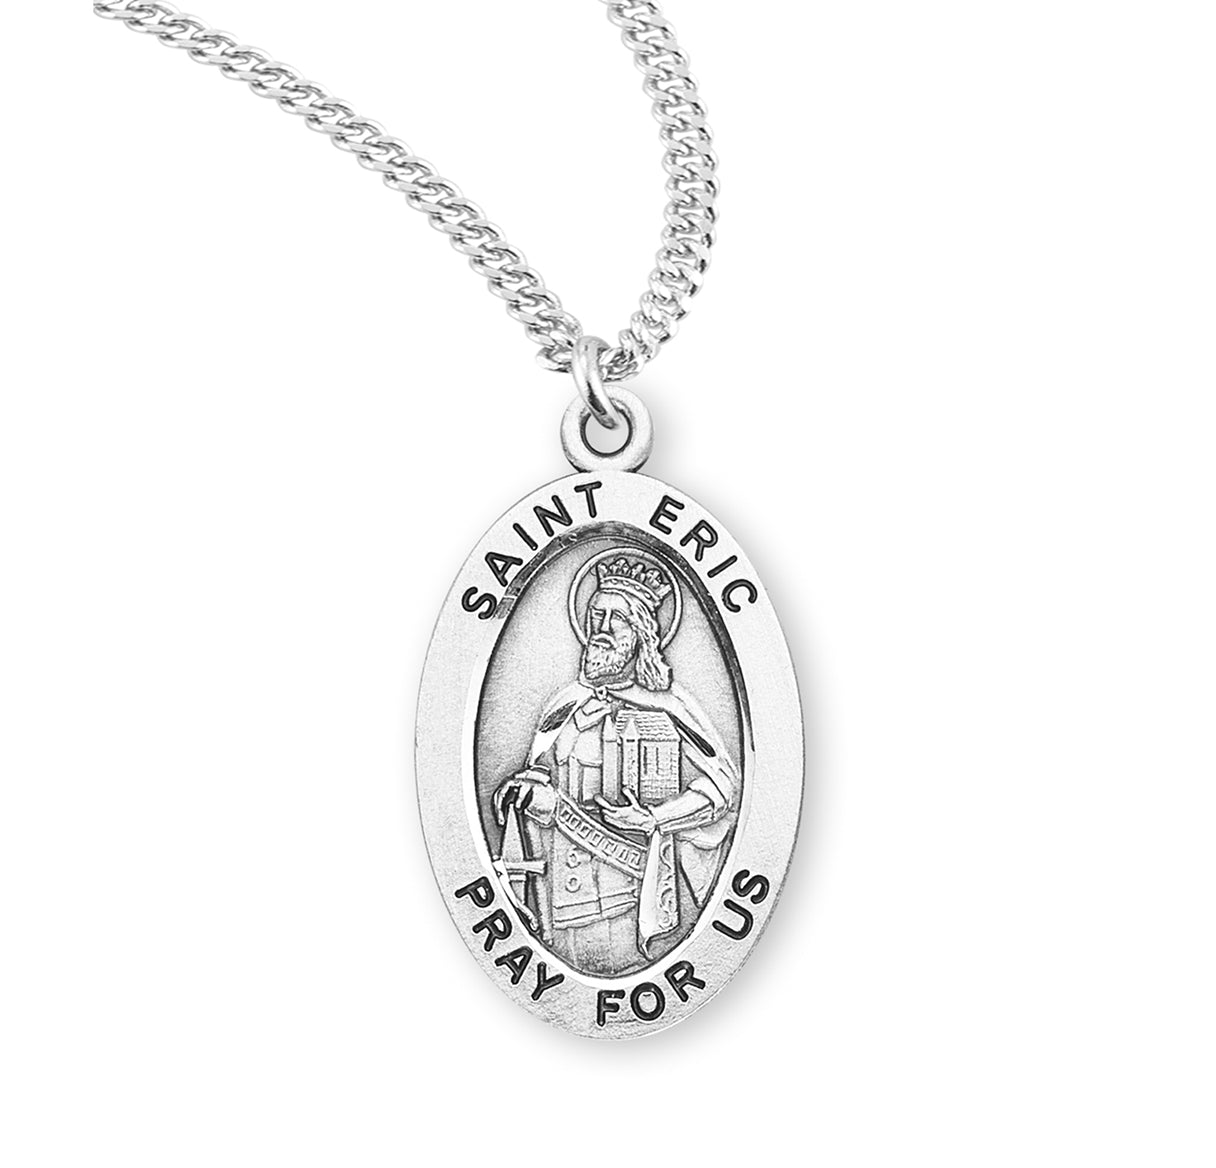 Patron Saint Eric Oval Sterling Silver Medal